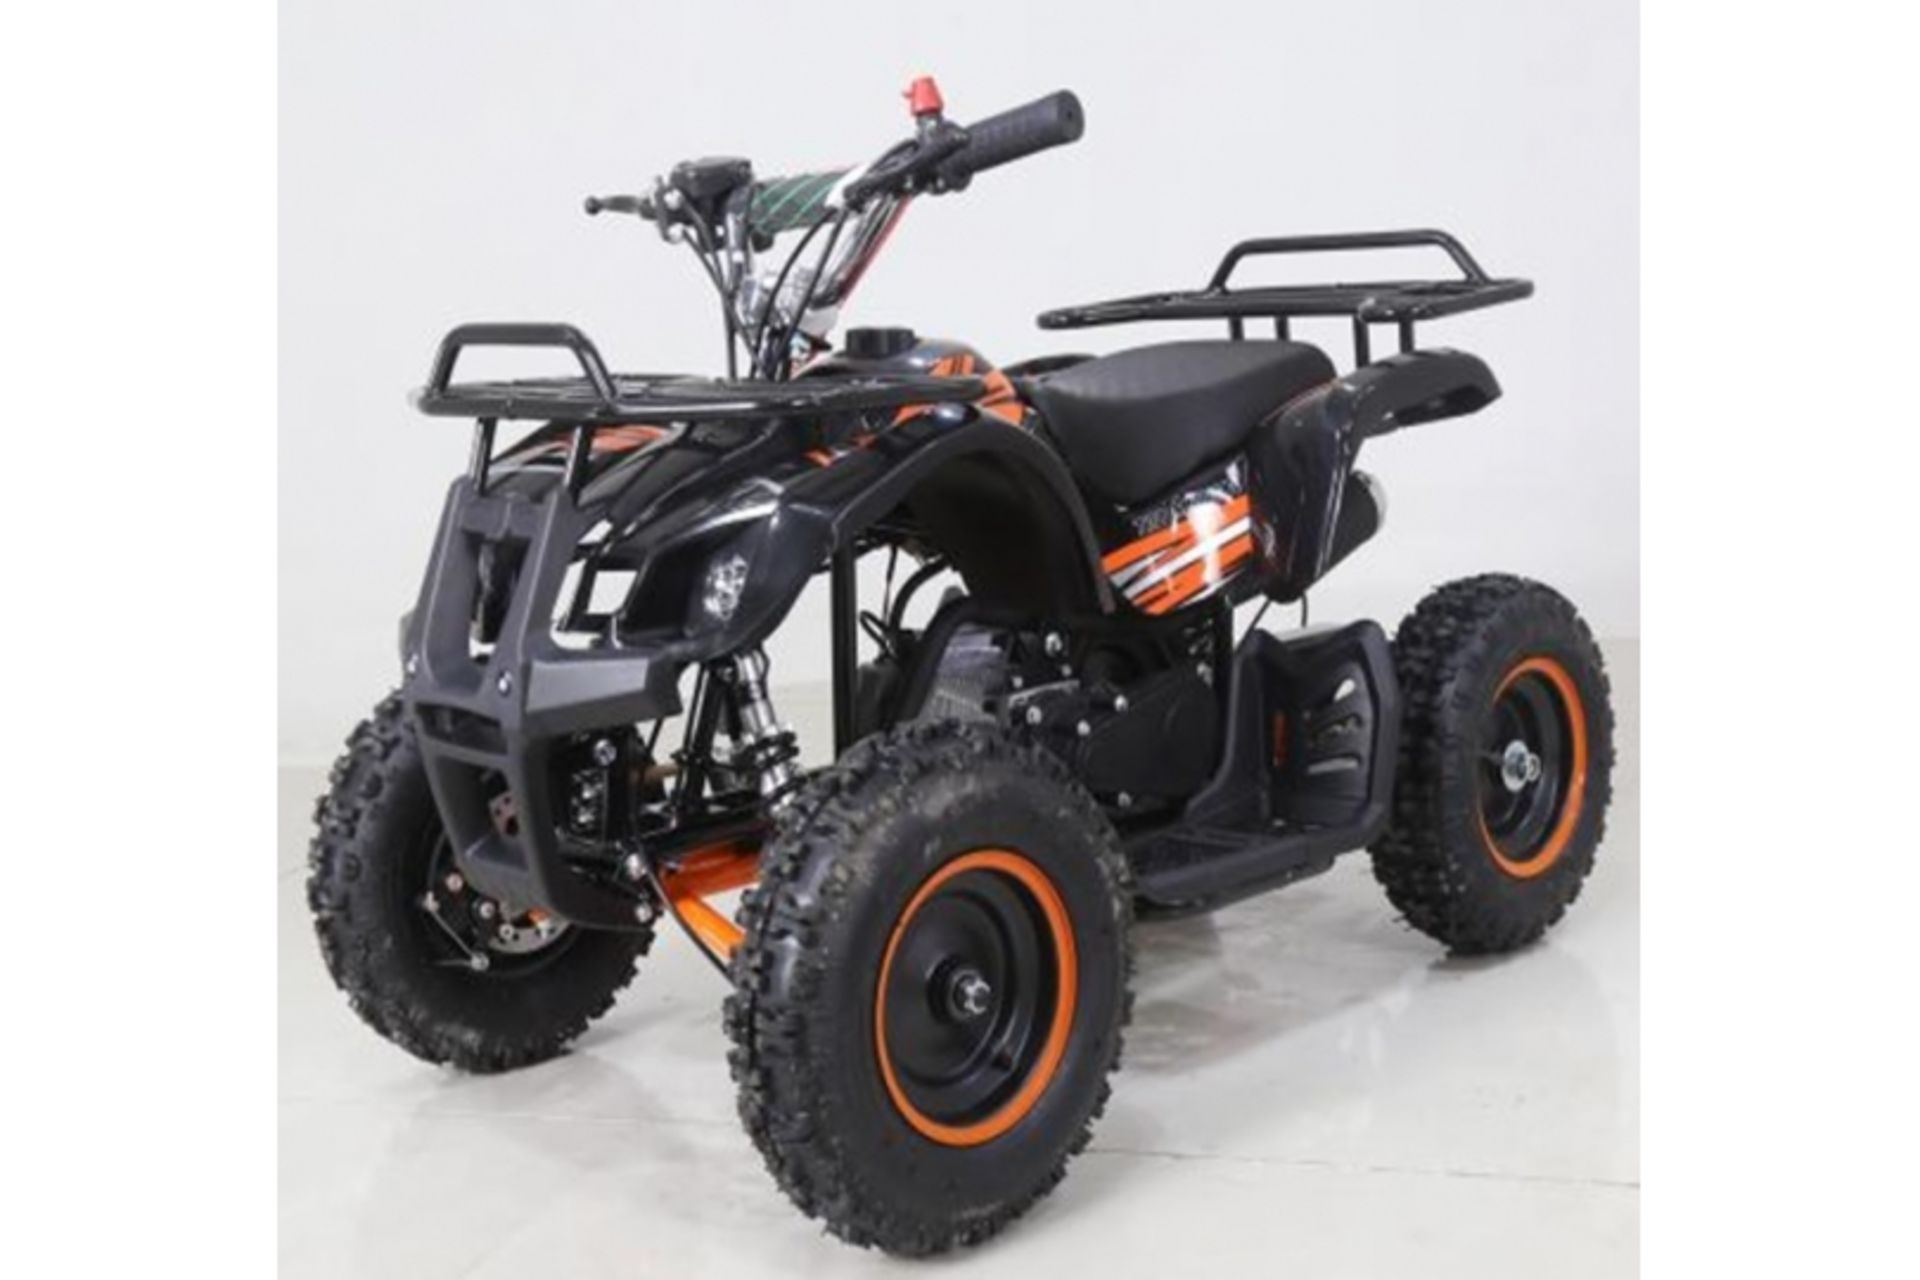 V Brand New 50cc Mini Quad Bike FRM - Colours May Vary - Available Approx 7 Working Days After